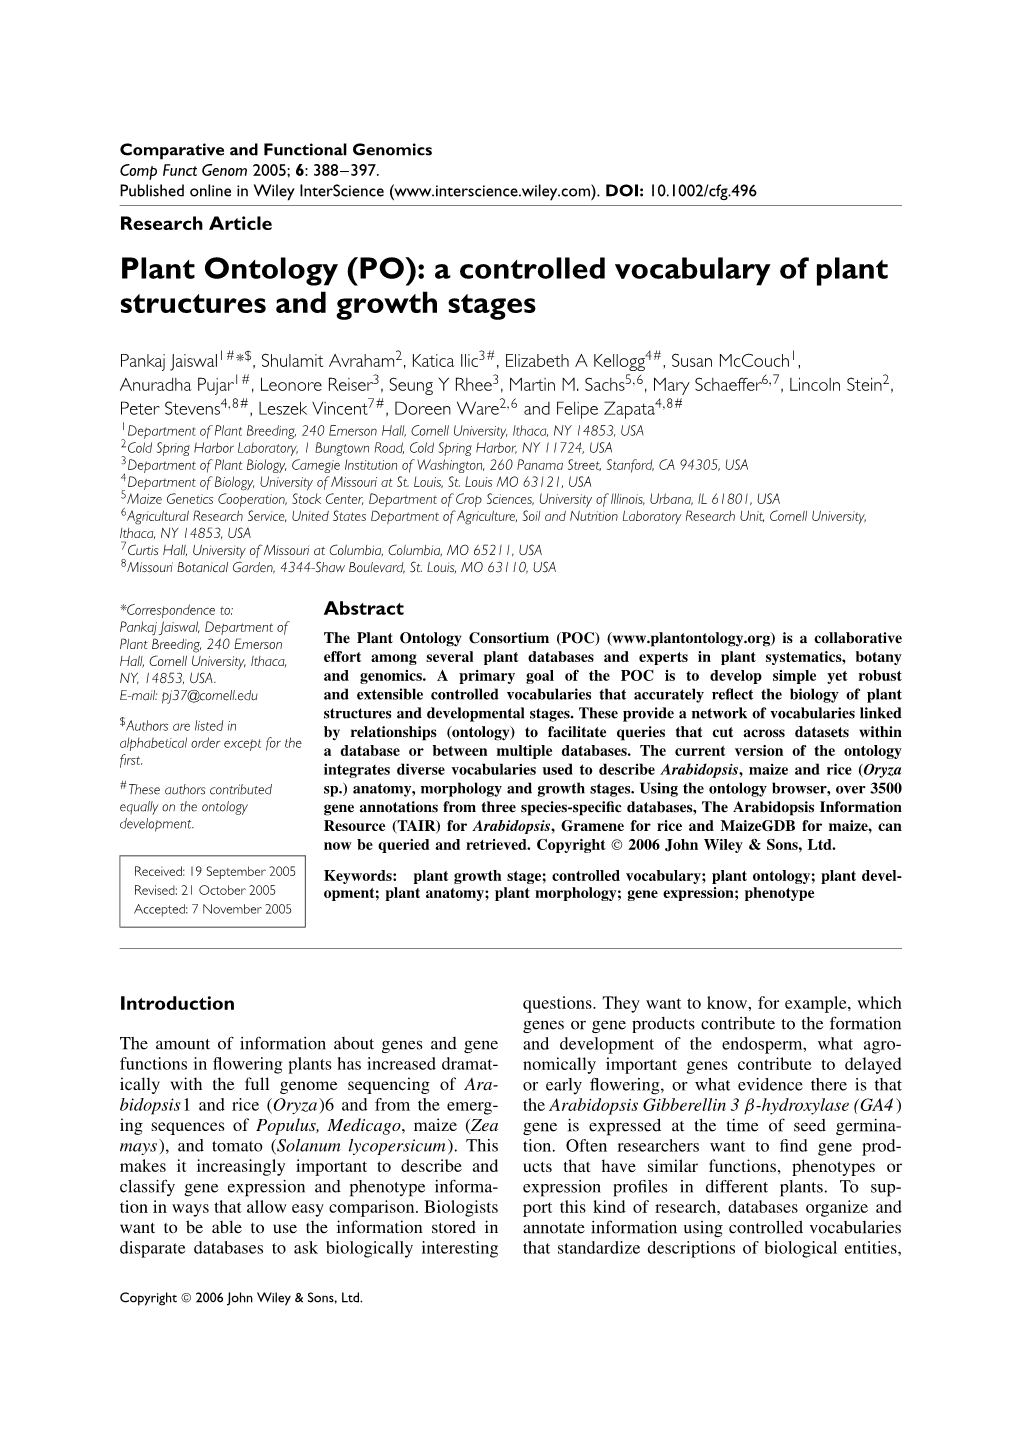 Plant Ontology (PO): a Controlled Vocabulary of Plant Structures and Growth Stages